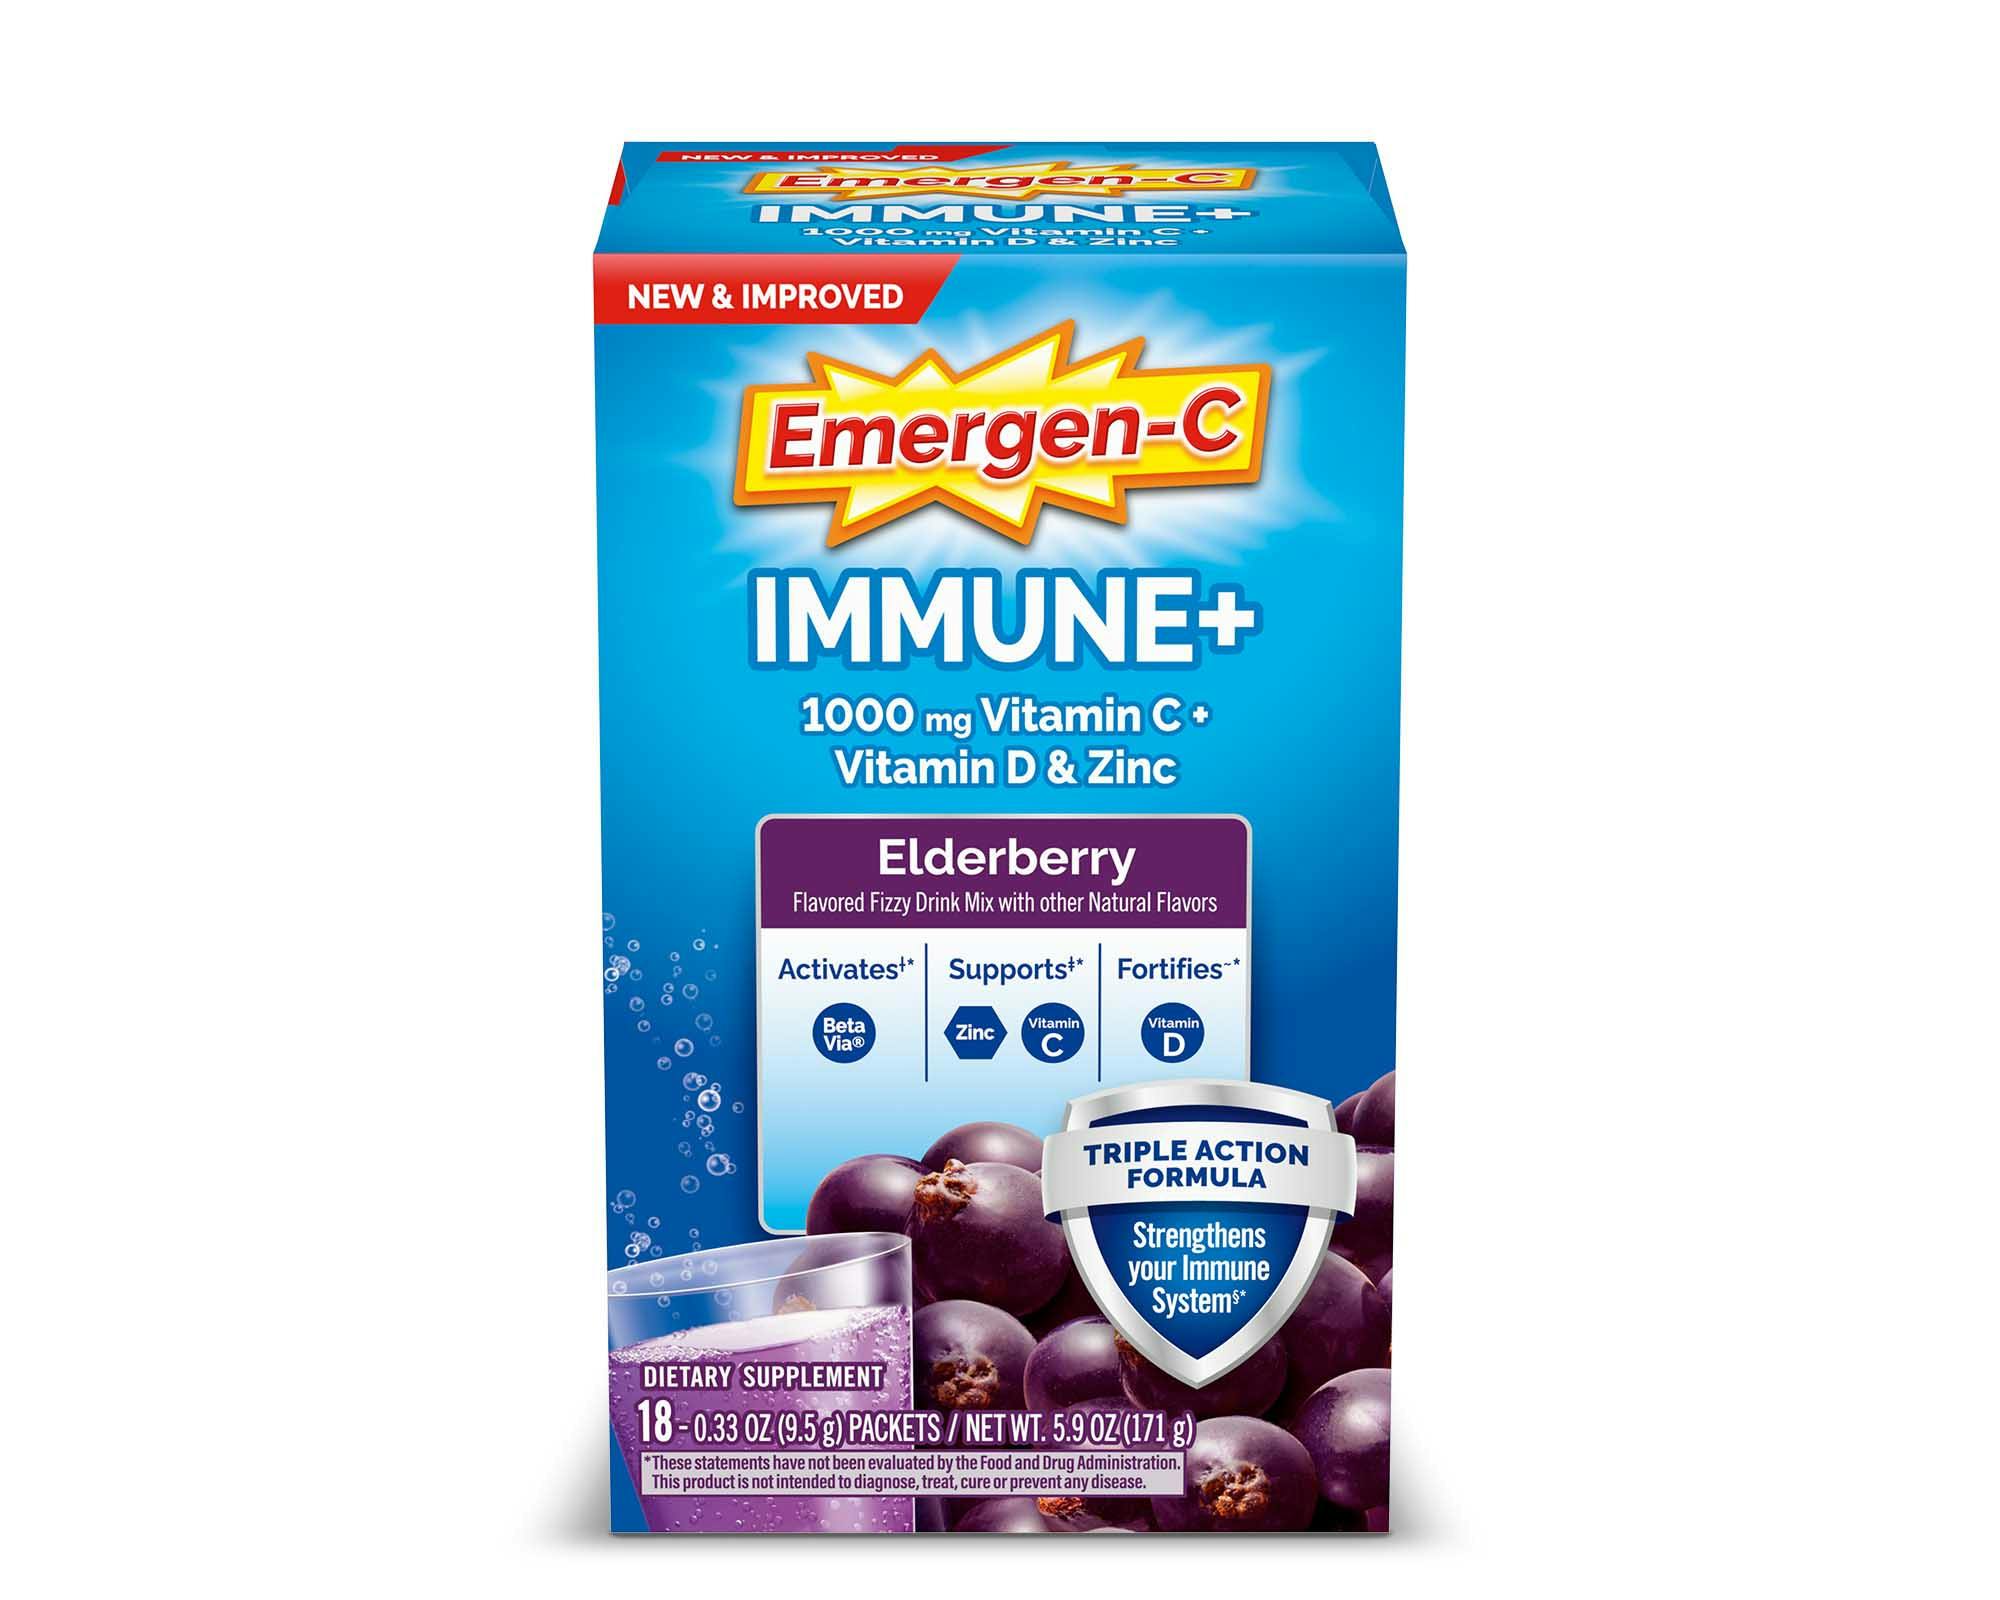 Immune+ Elderberry with Triple Action product